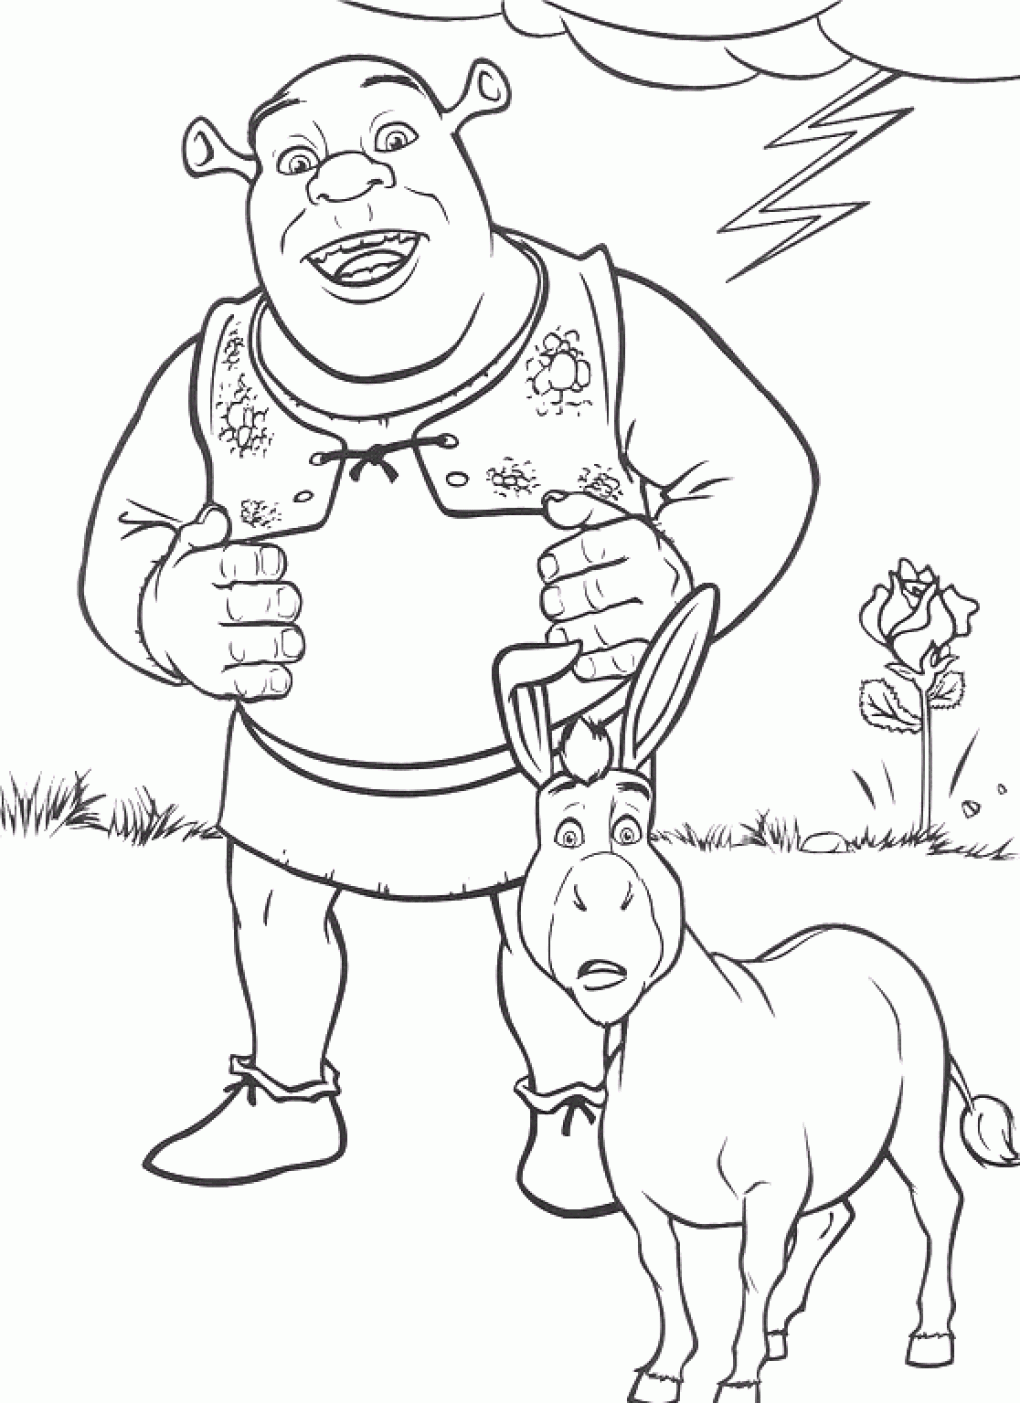 Another beautiful drawing to color of Shrek and the donkey